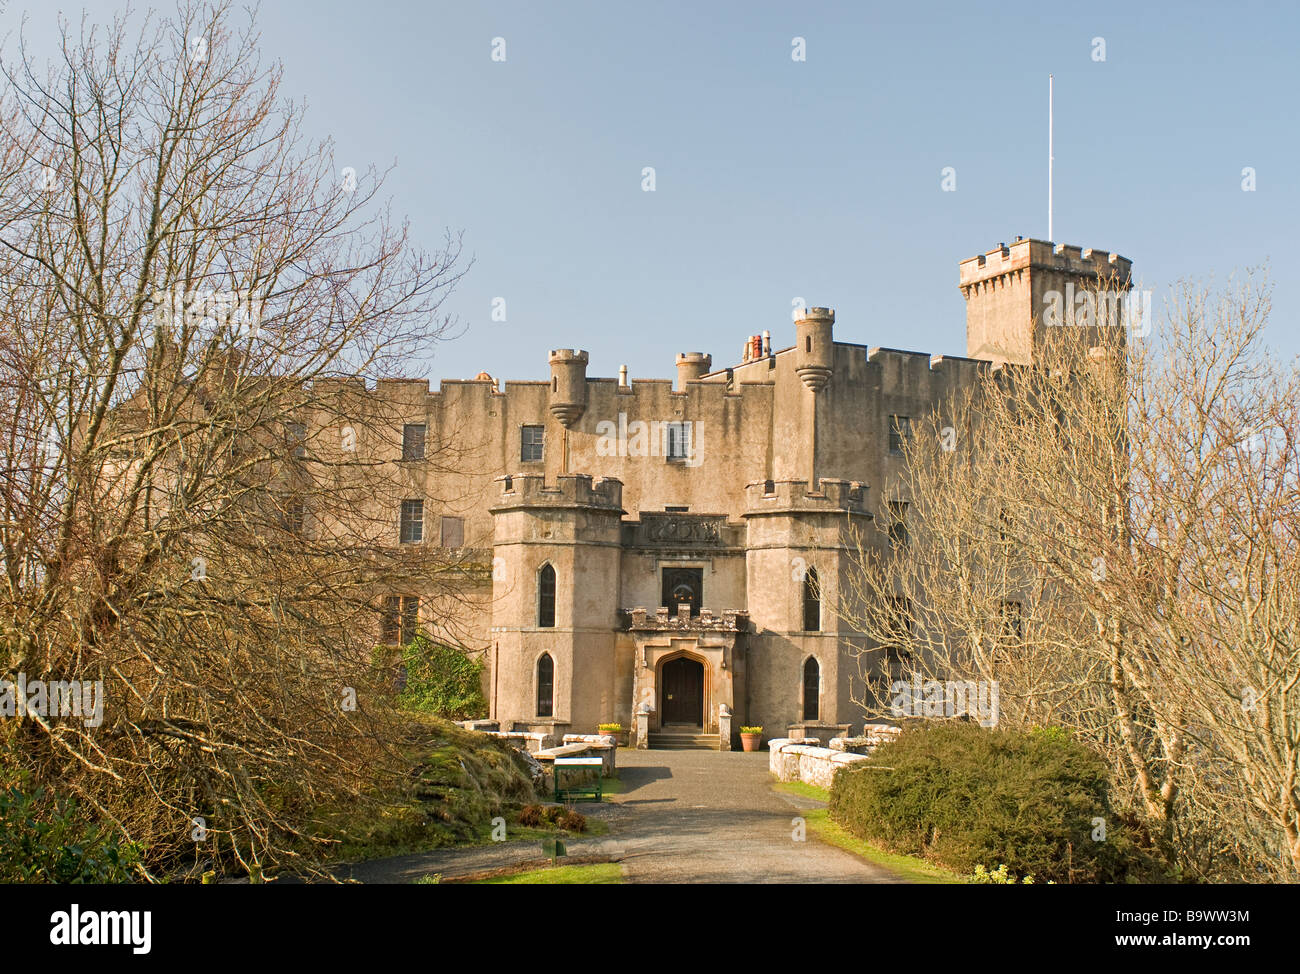 The front entrance to the Castle of Dunvegan on the Waternish peninsula  on the Isle of Skye Scotland  SCO 2267 Stock Photo